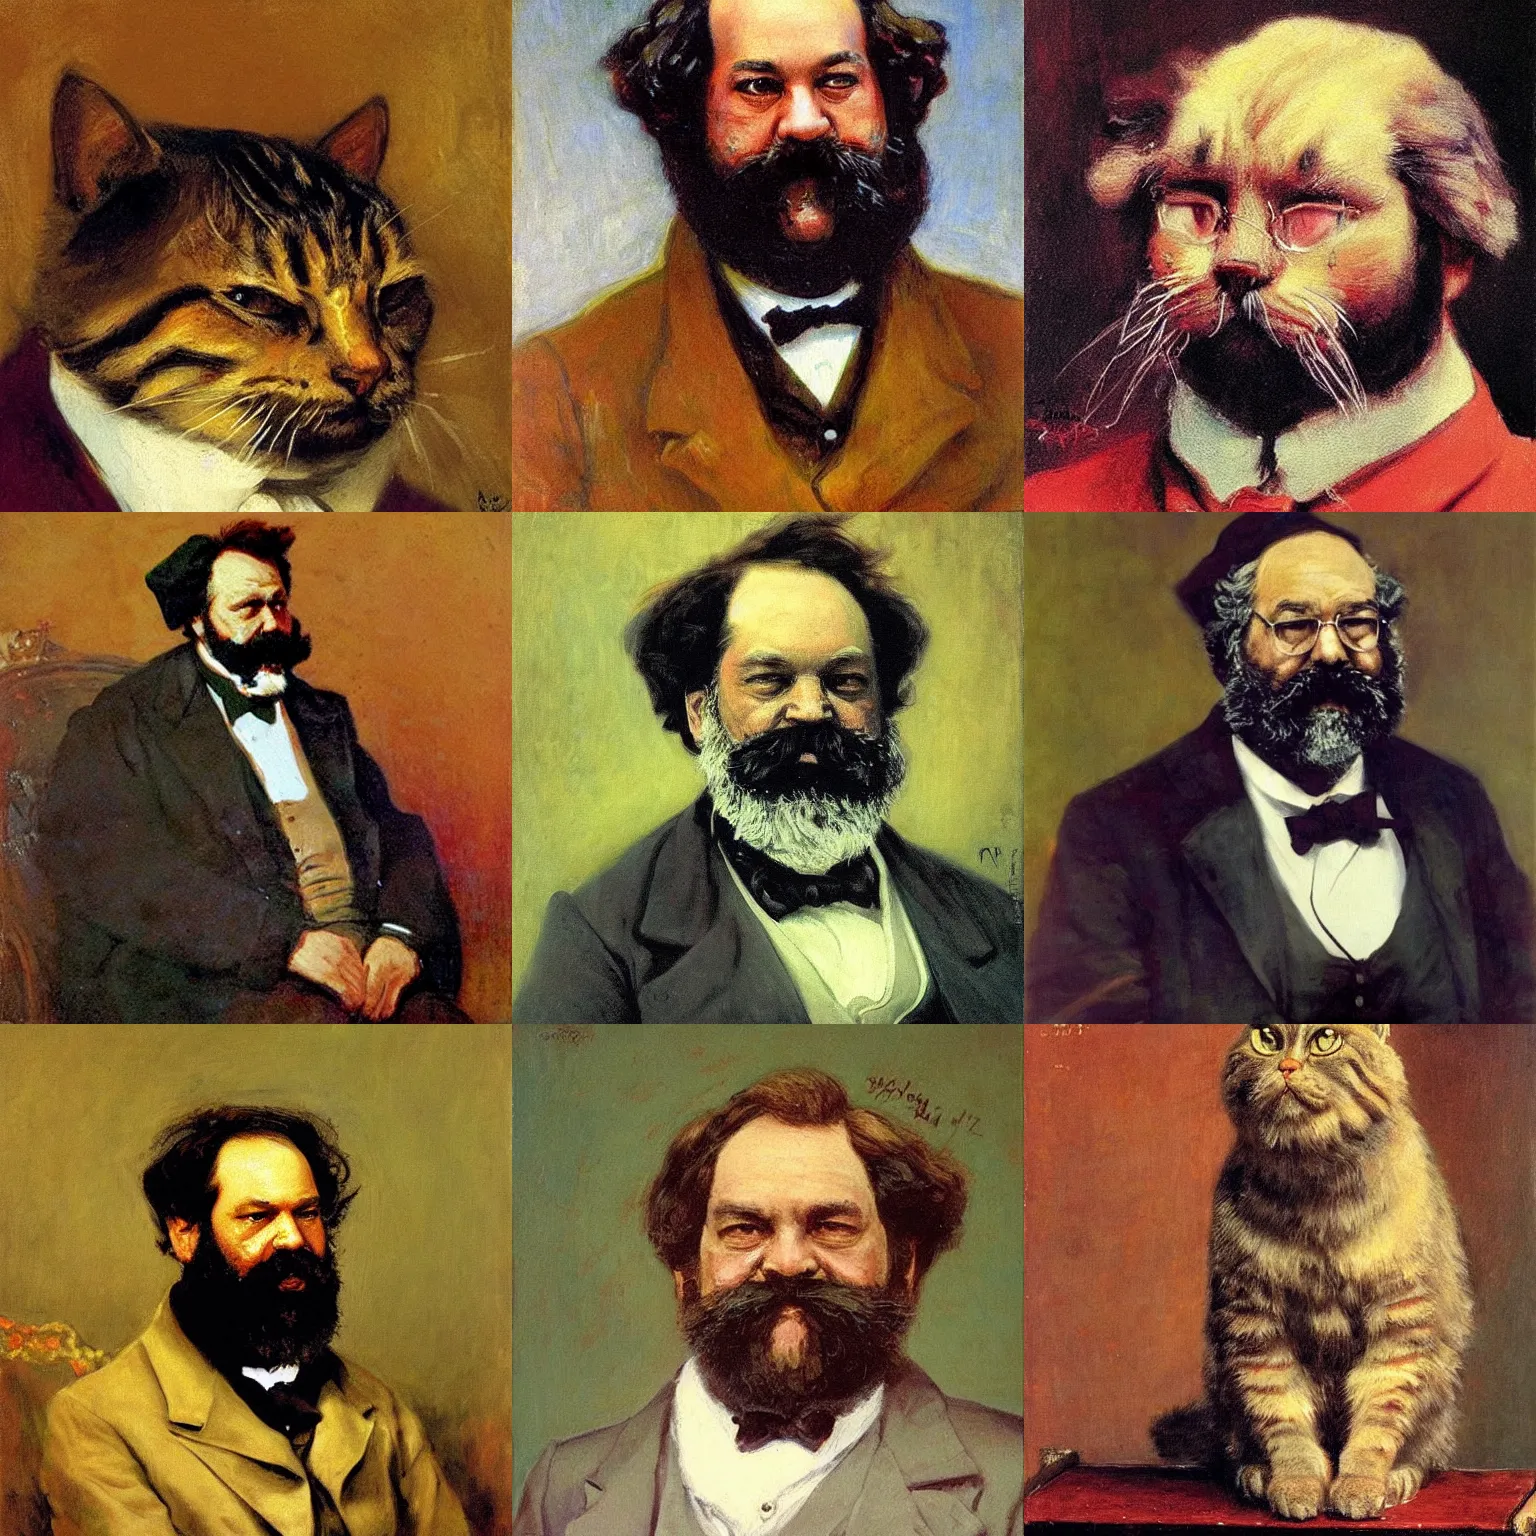 Prompt: Garfield the Cat as Karl Marx, portrait painting by Ilya Repin